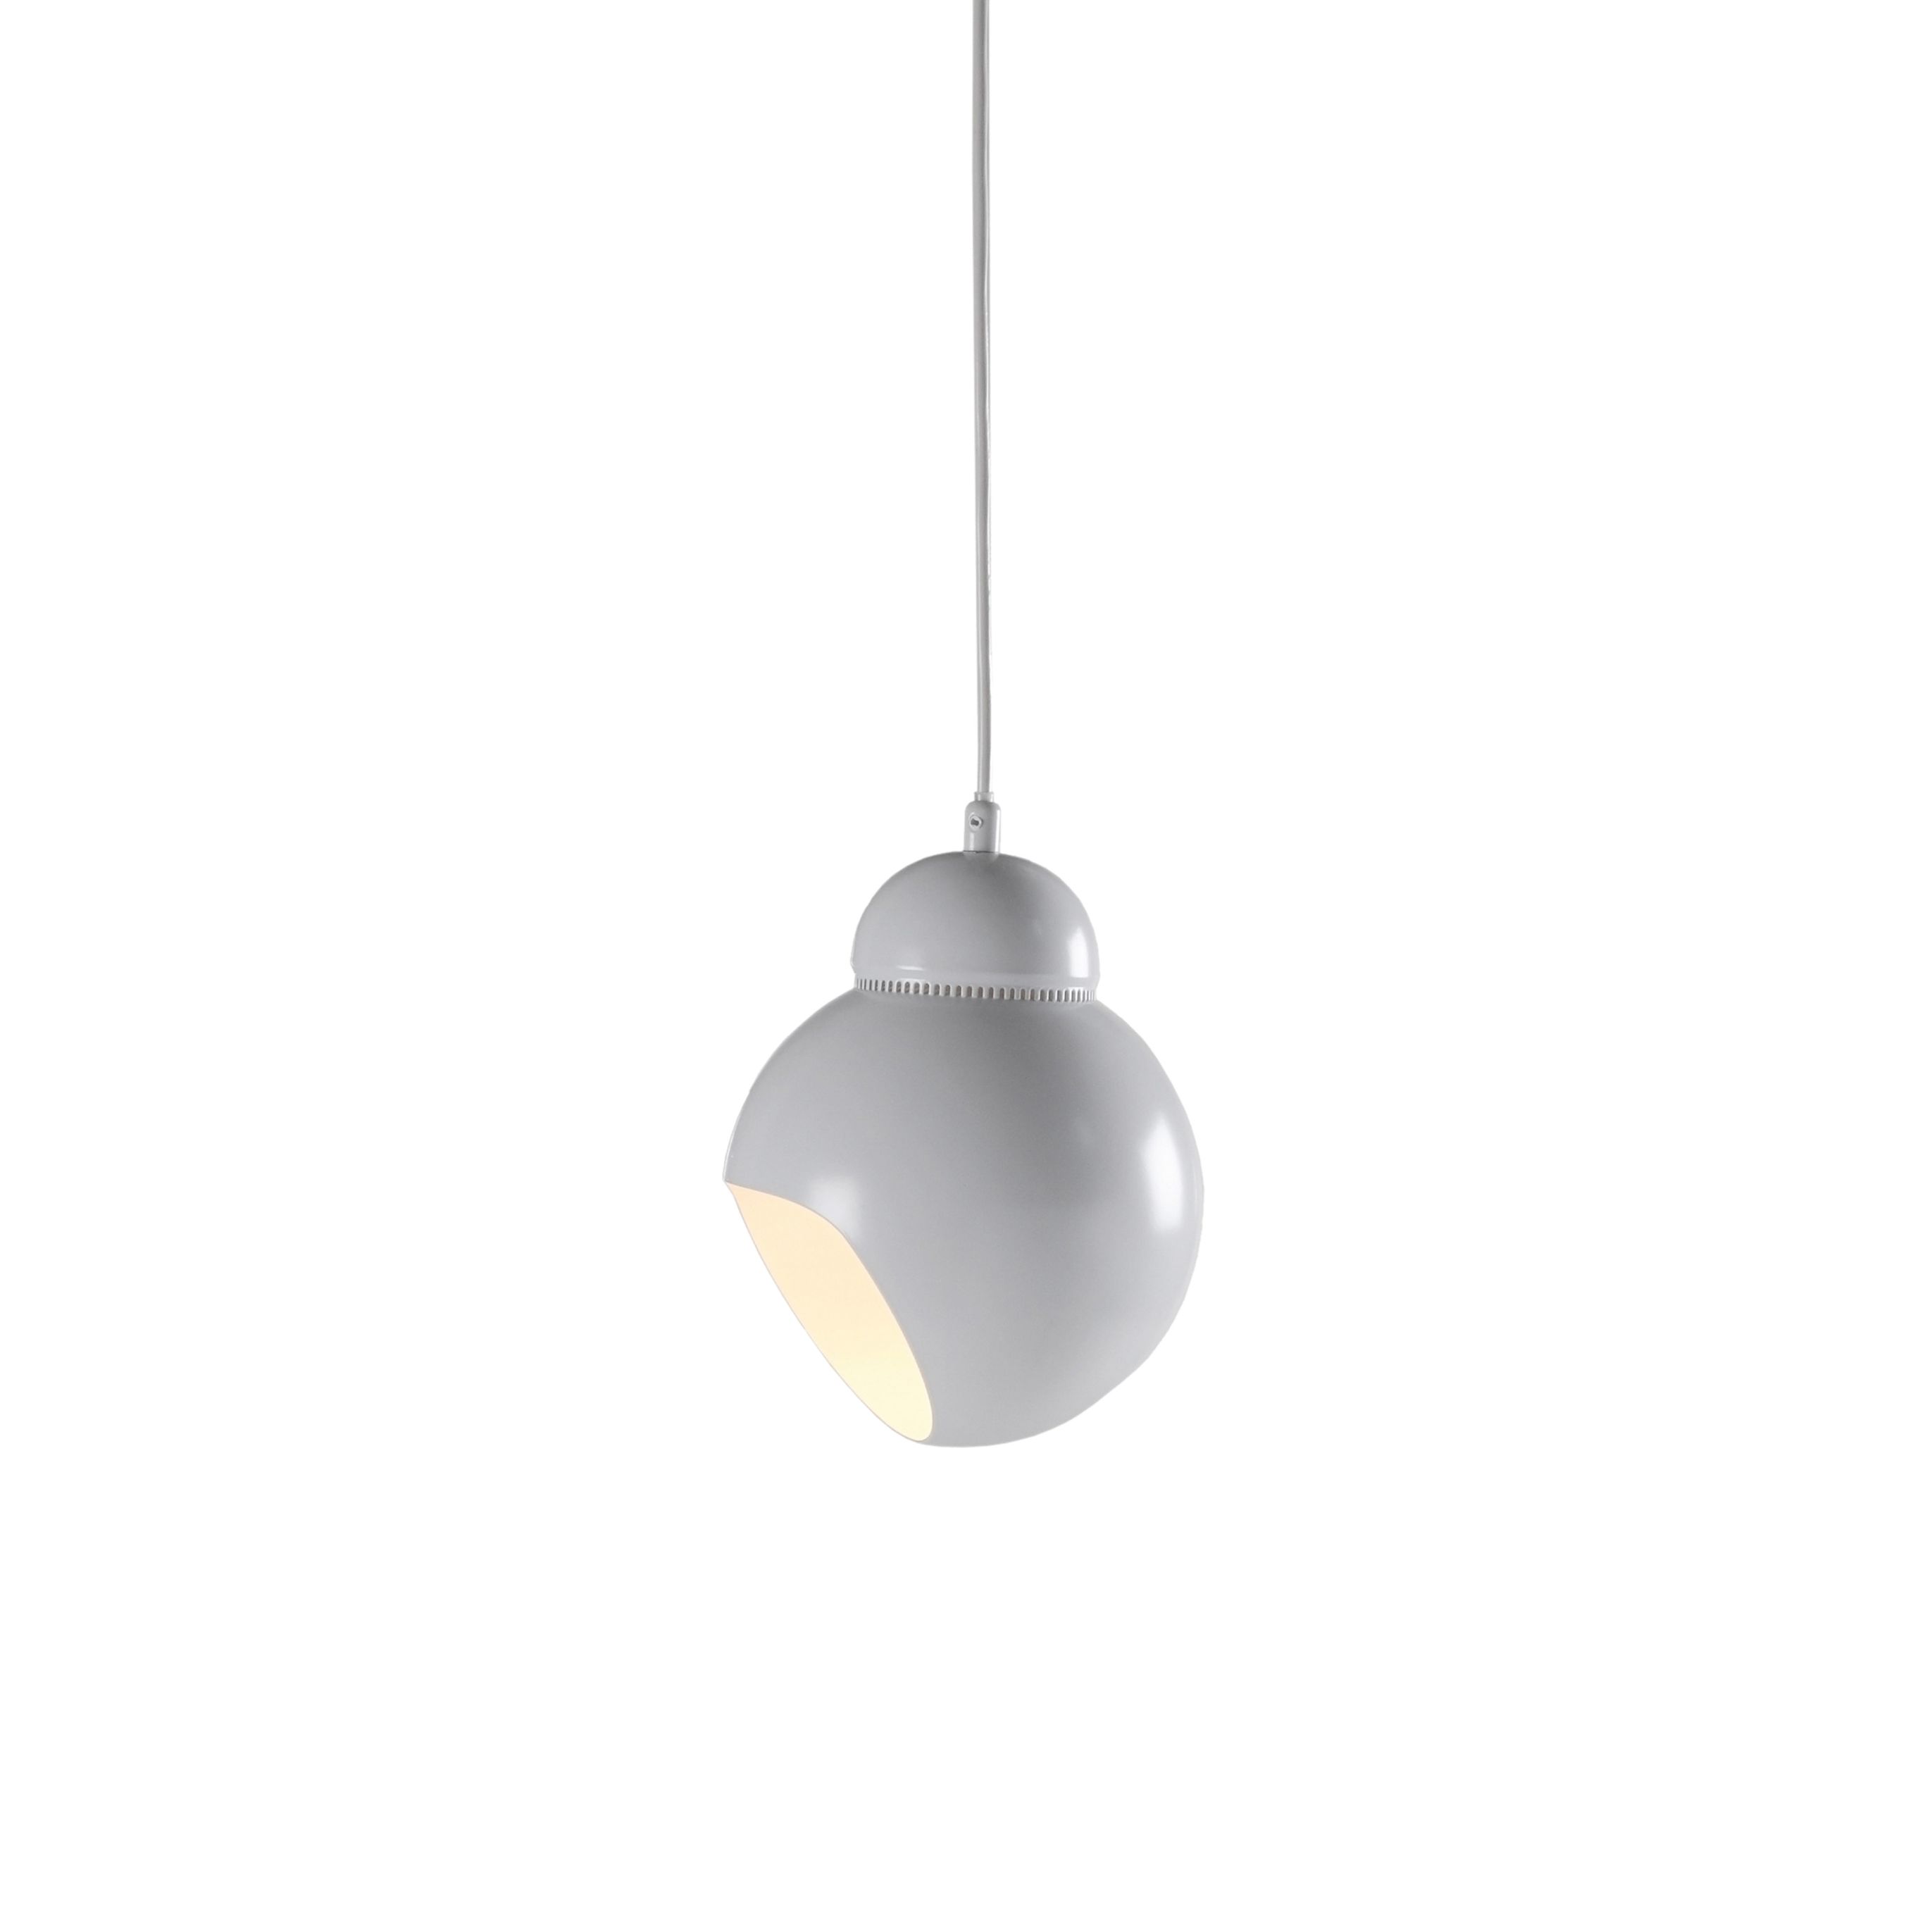 Pendant-Light-A338-_Bilberry_-cut-out-on_WEB-1975945